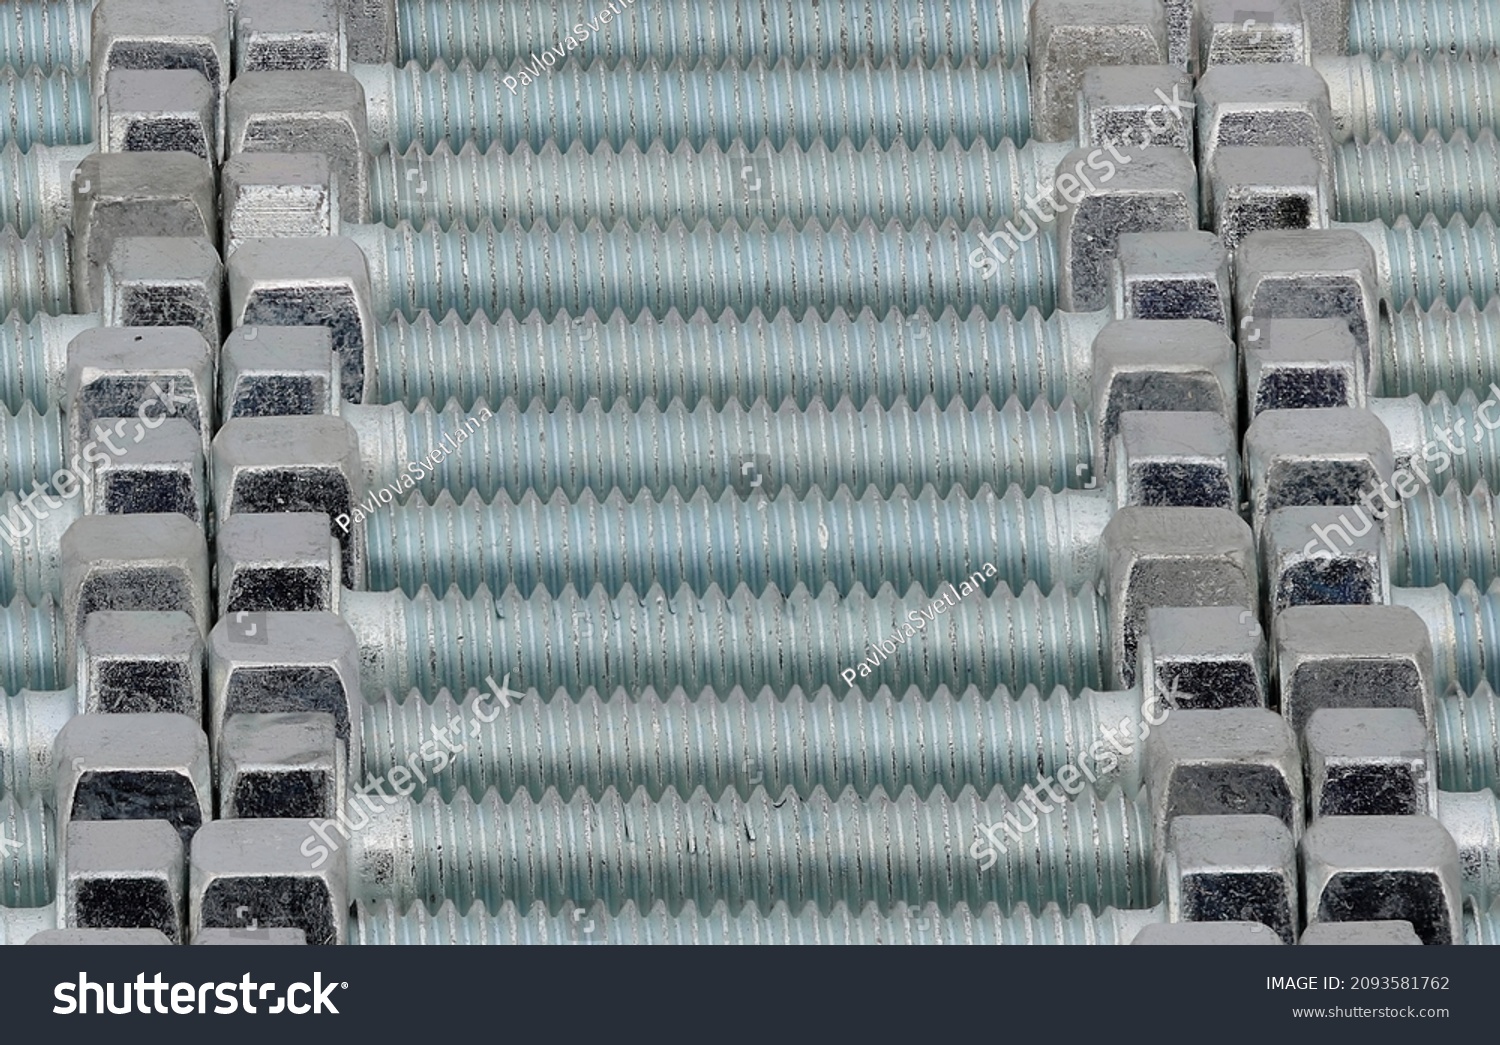 A background of rows of high strength chrome plated bolts with a turquoise sheen, close-up. #2093581762